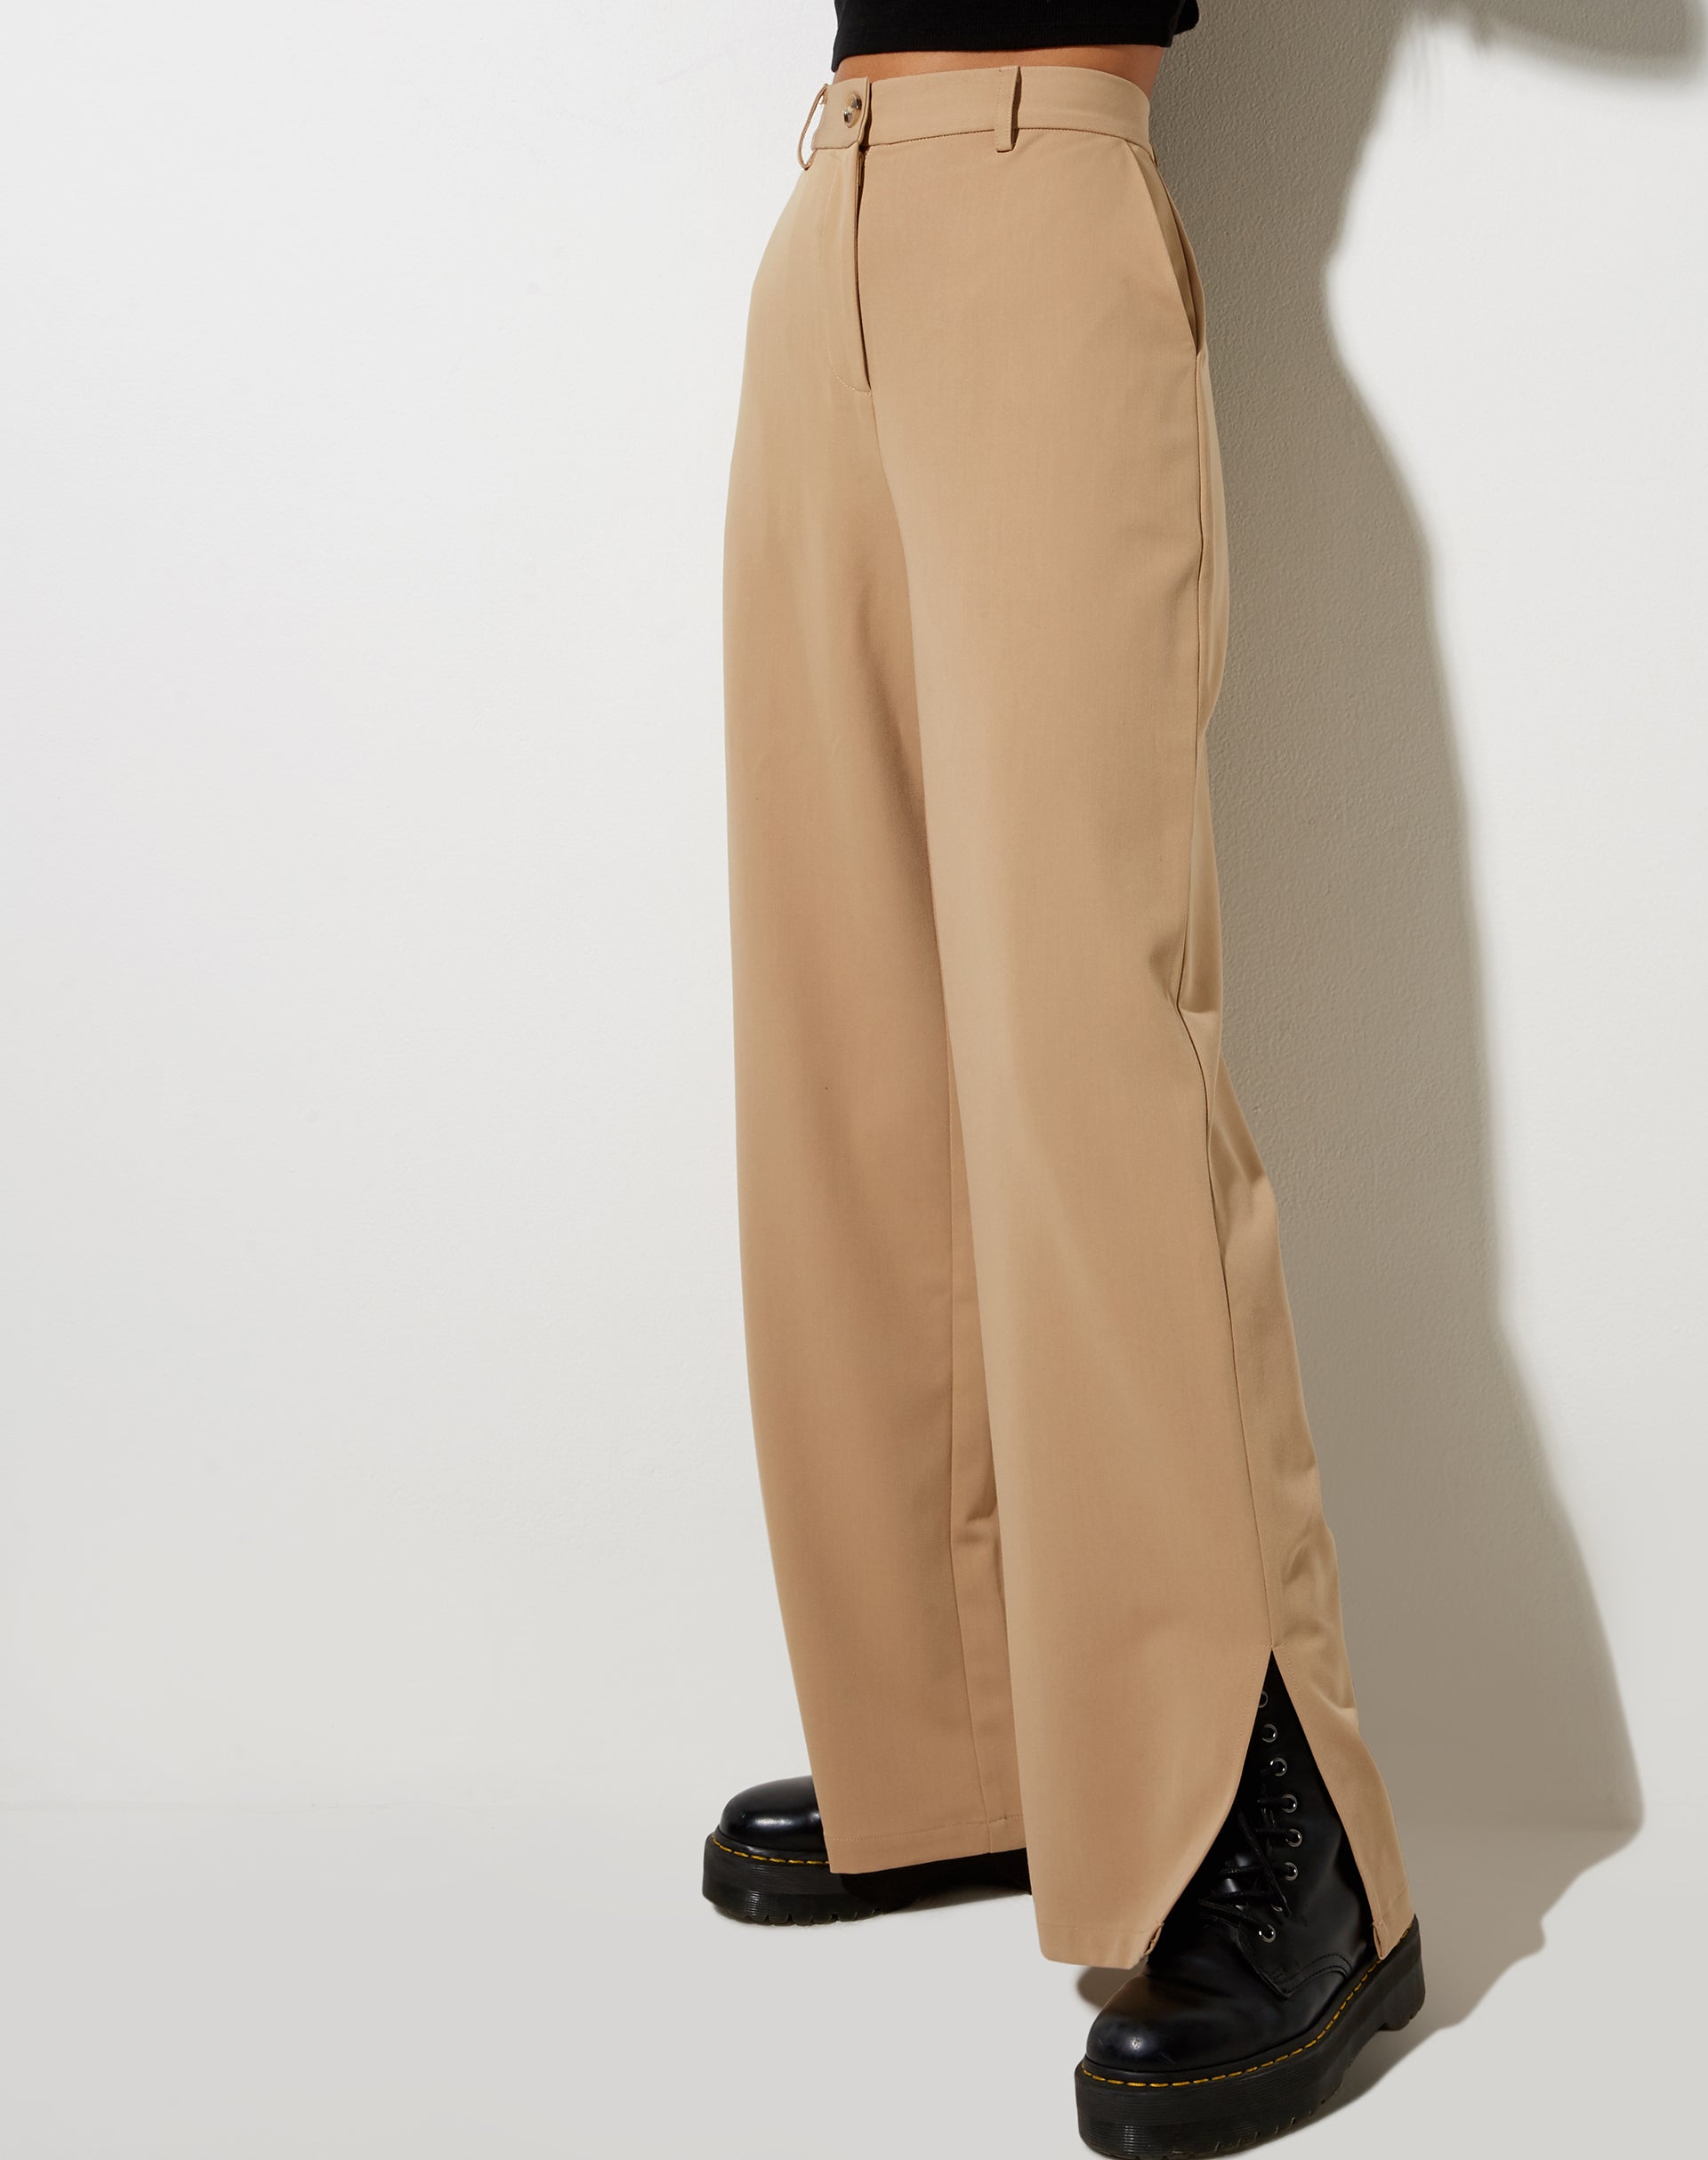 Image of Gege Trouser in Almond